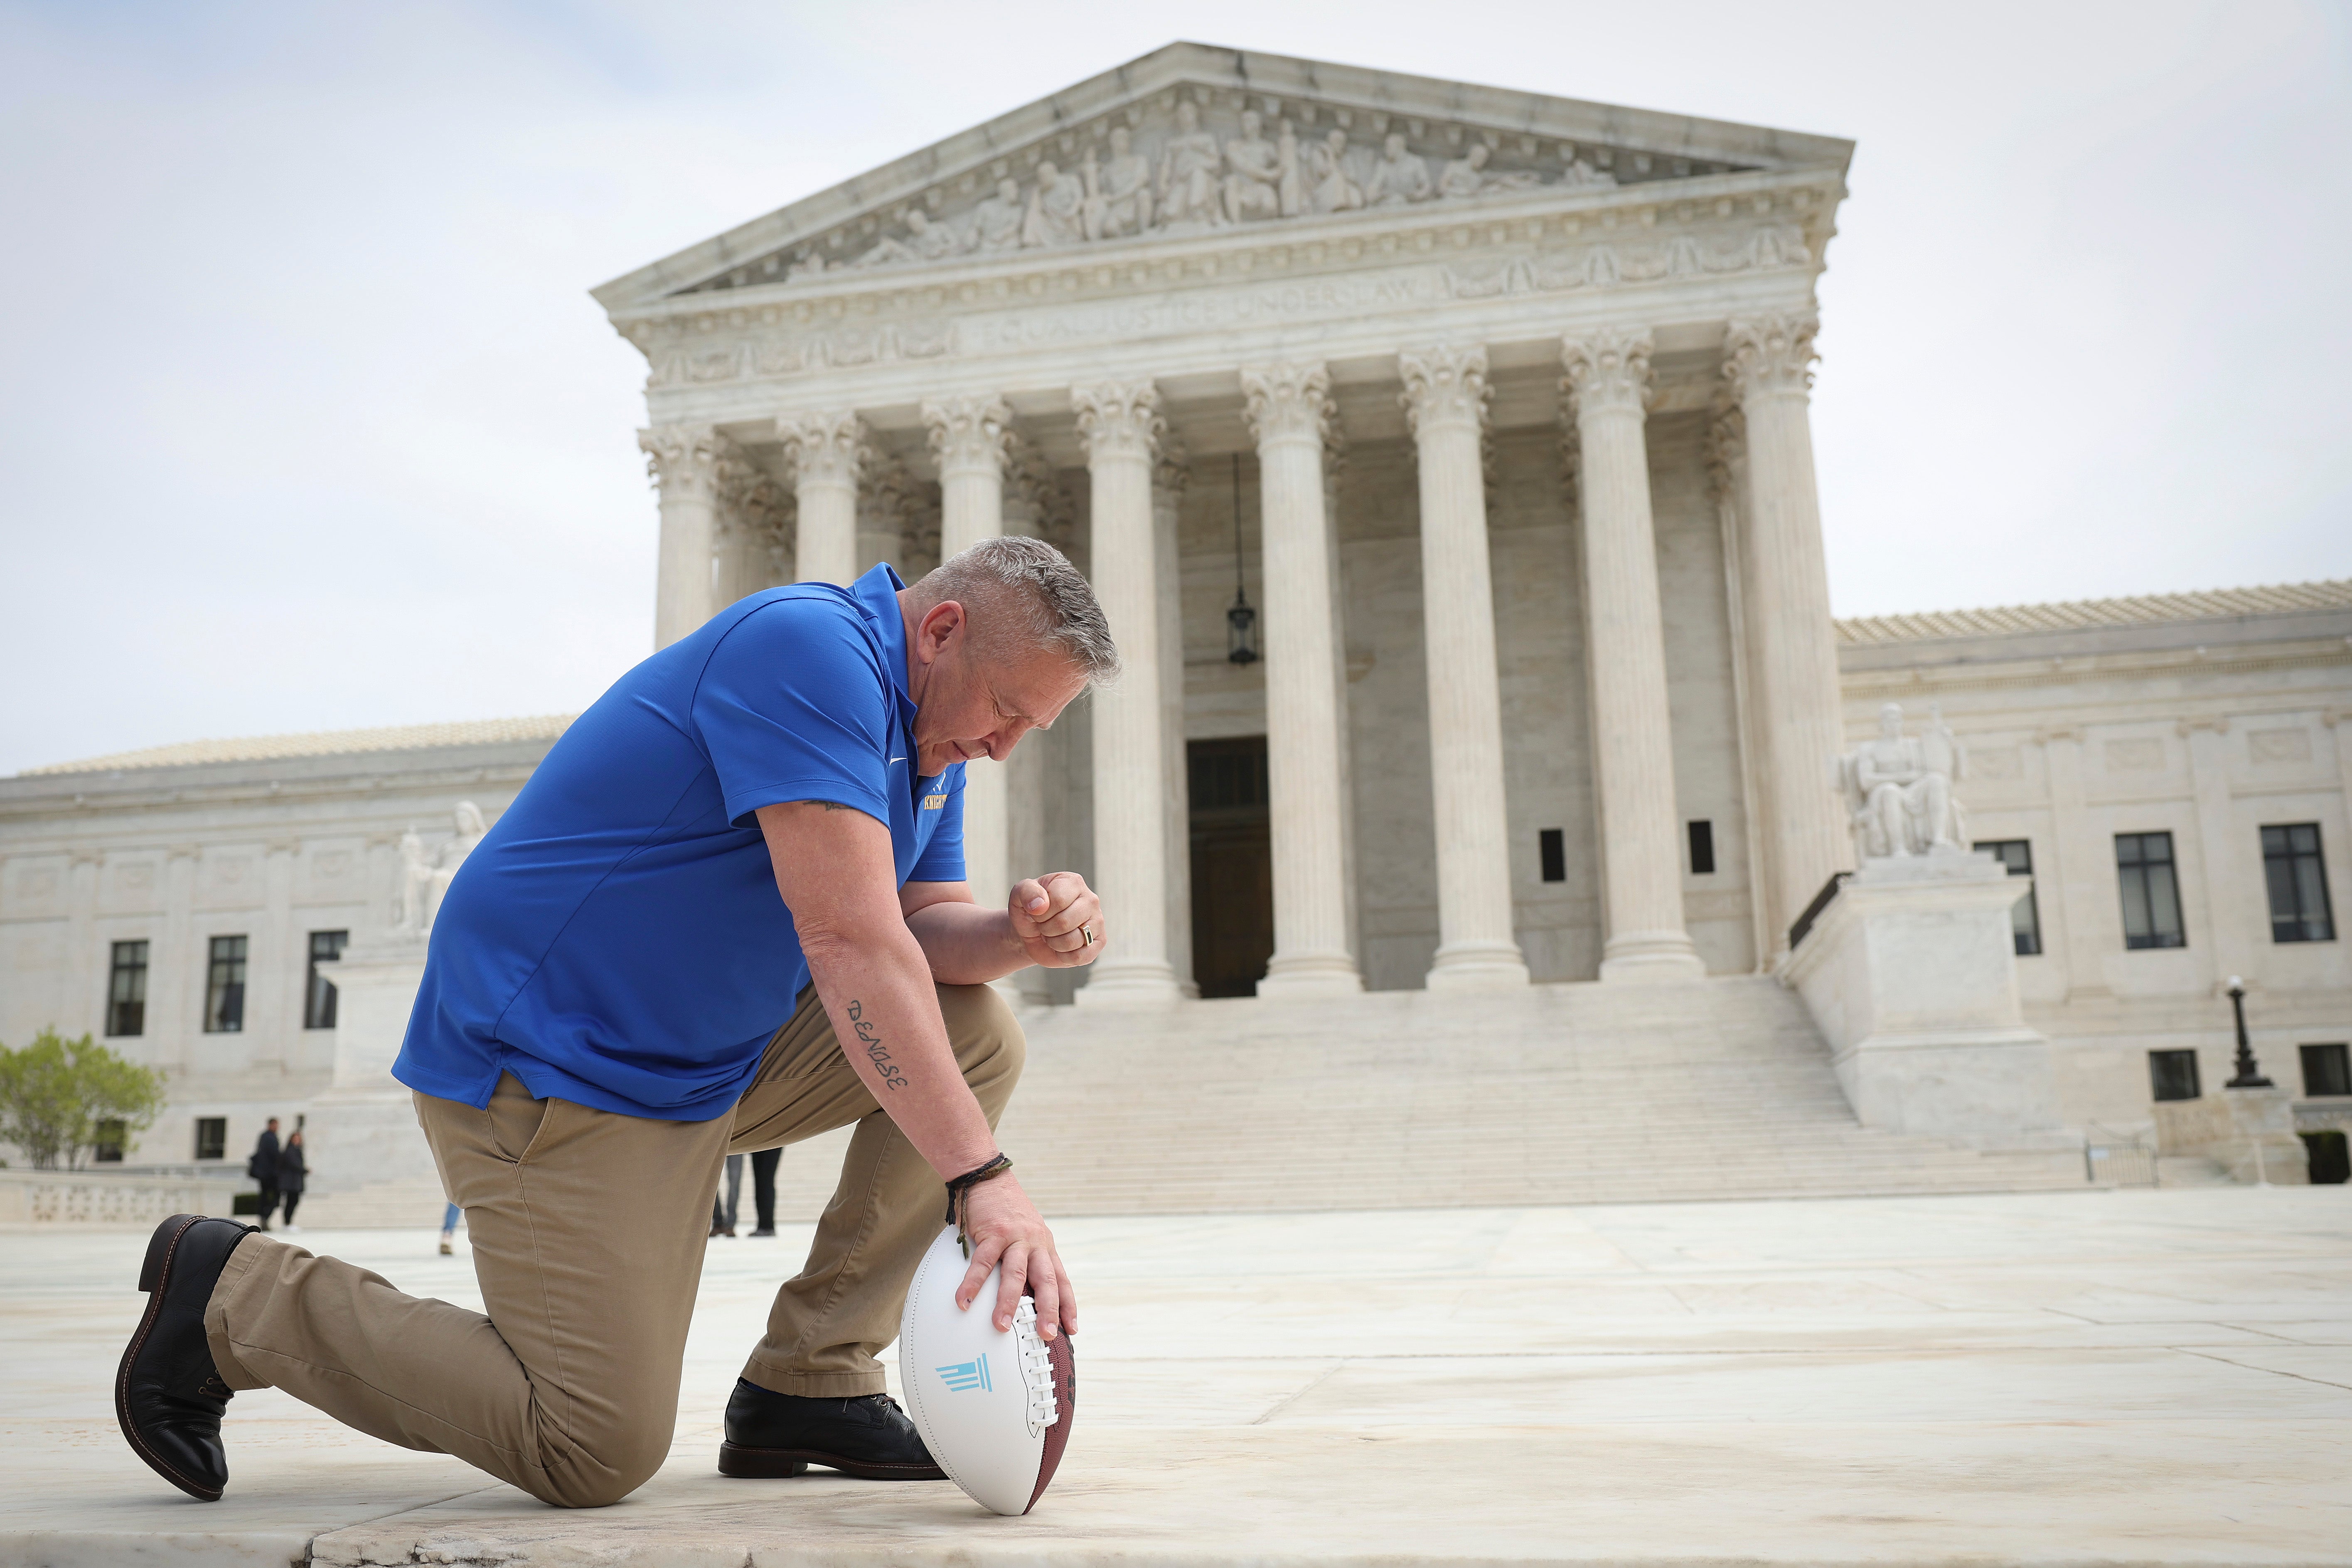 Former Bremerton High School football coach Joe Kennedy takes a knee in front of US Supreme Court